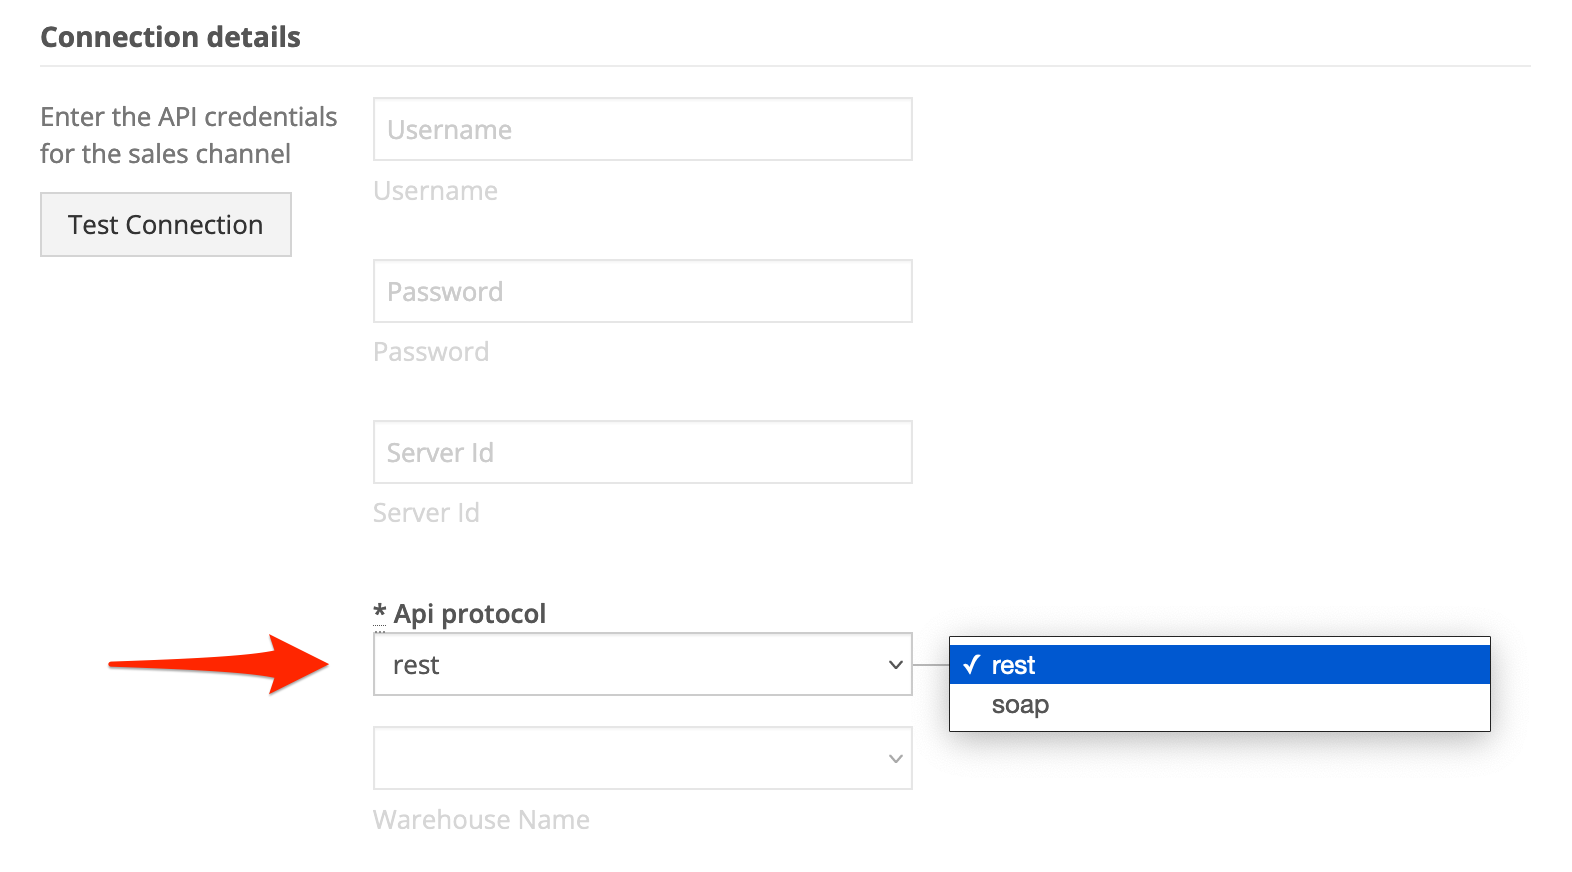 In Sellercloud connection details, for API protocol, choose REST.